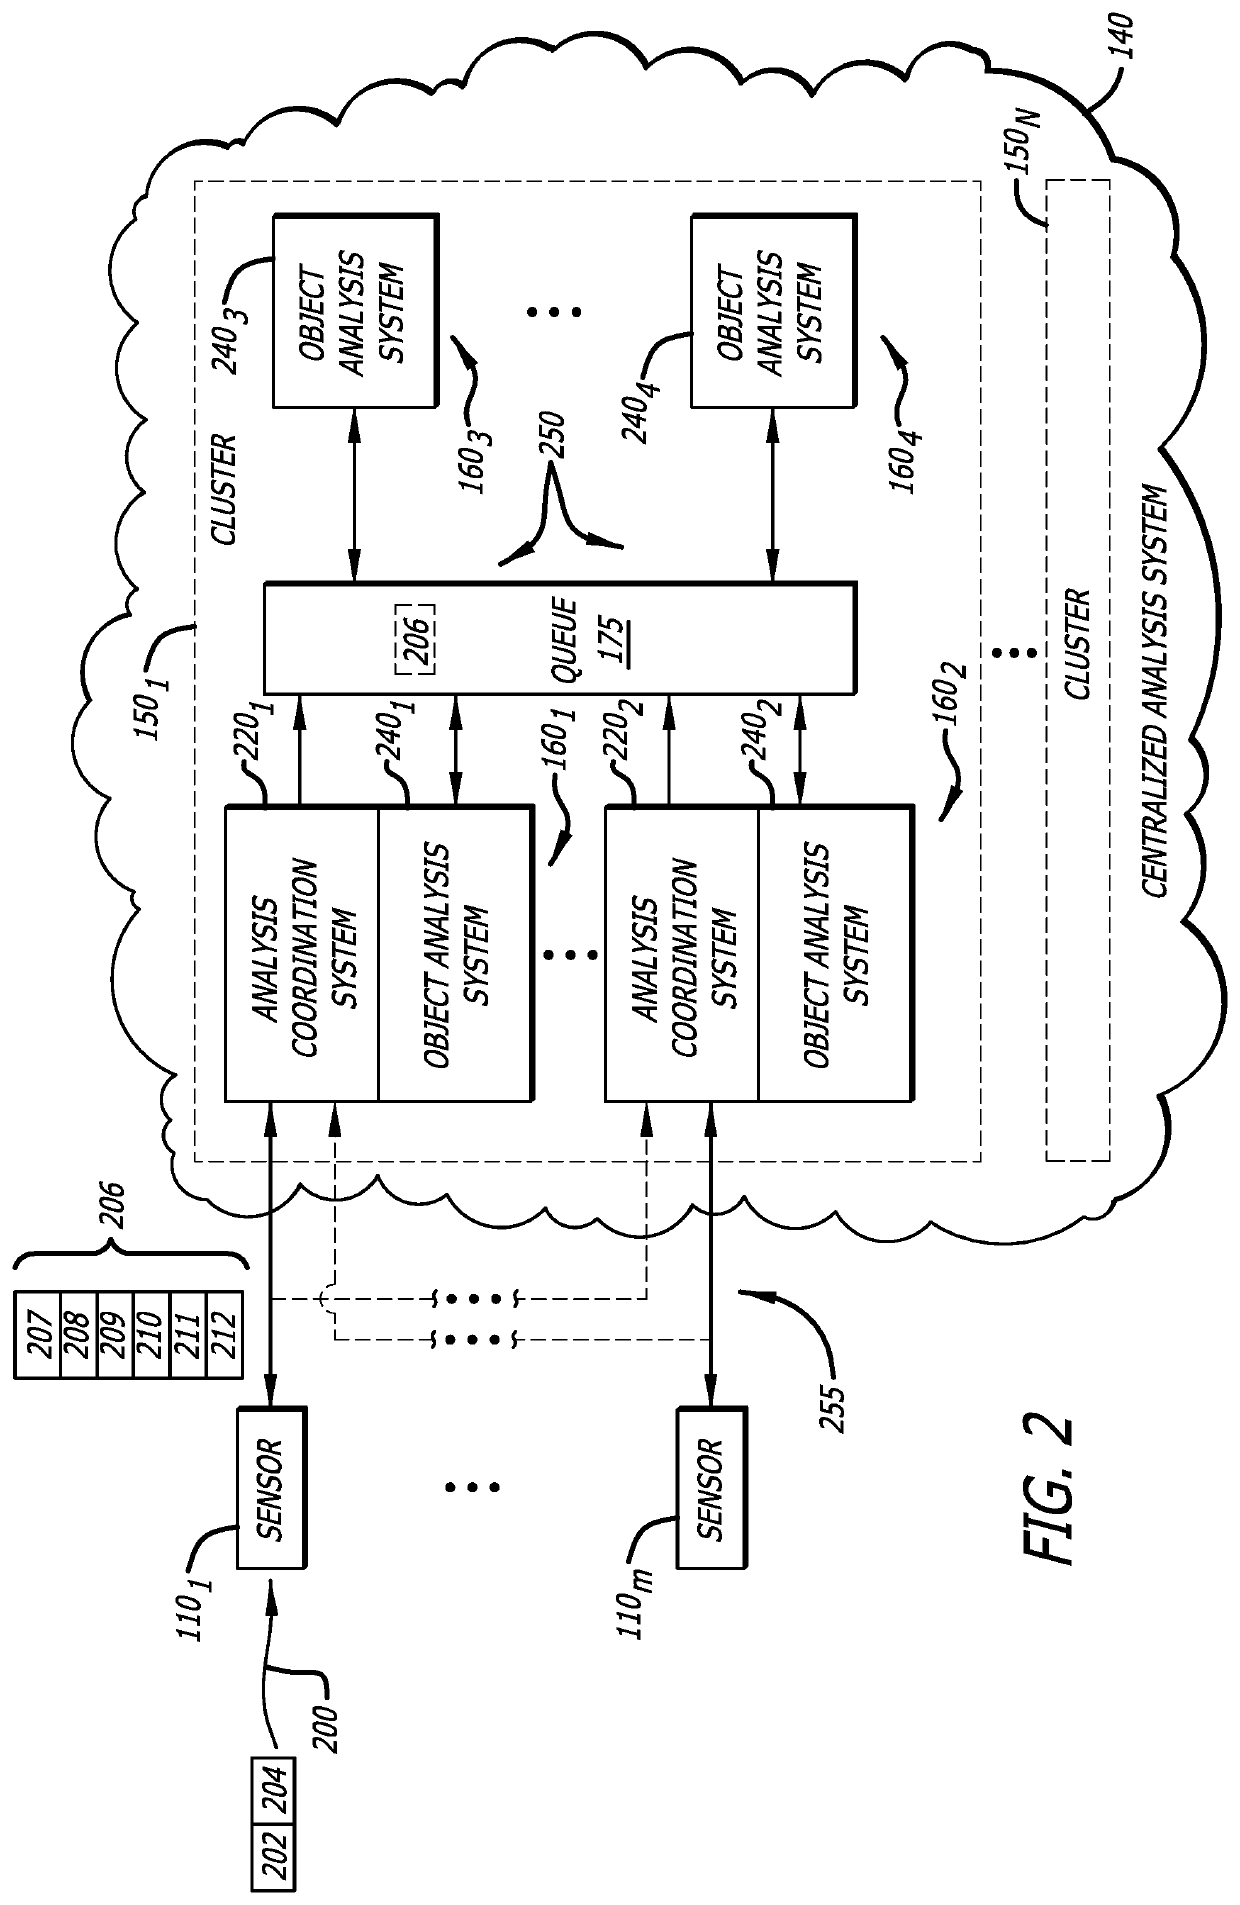 Cluster configuration within a scalable malware detection system